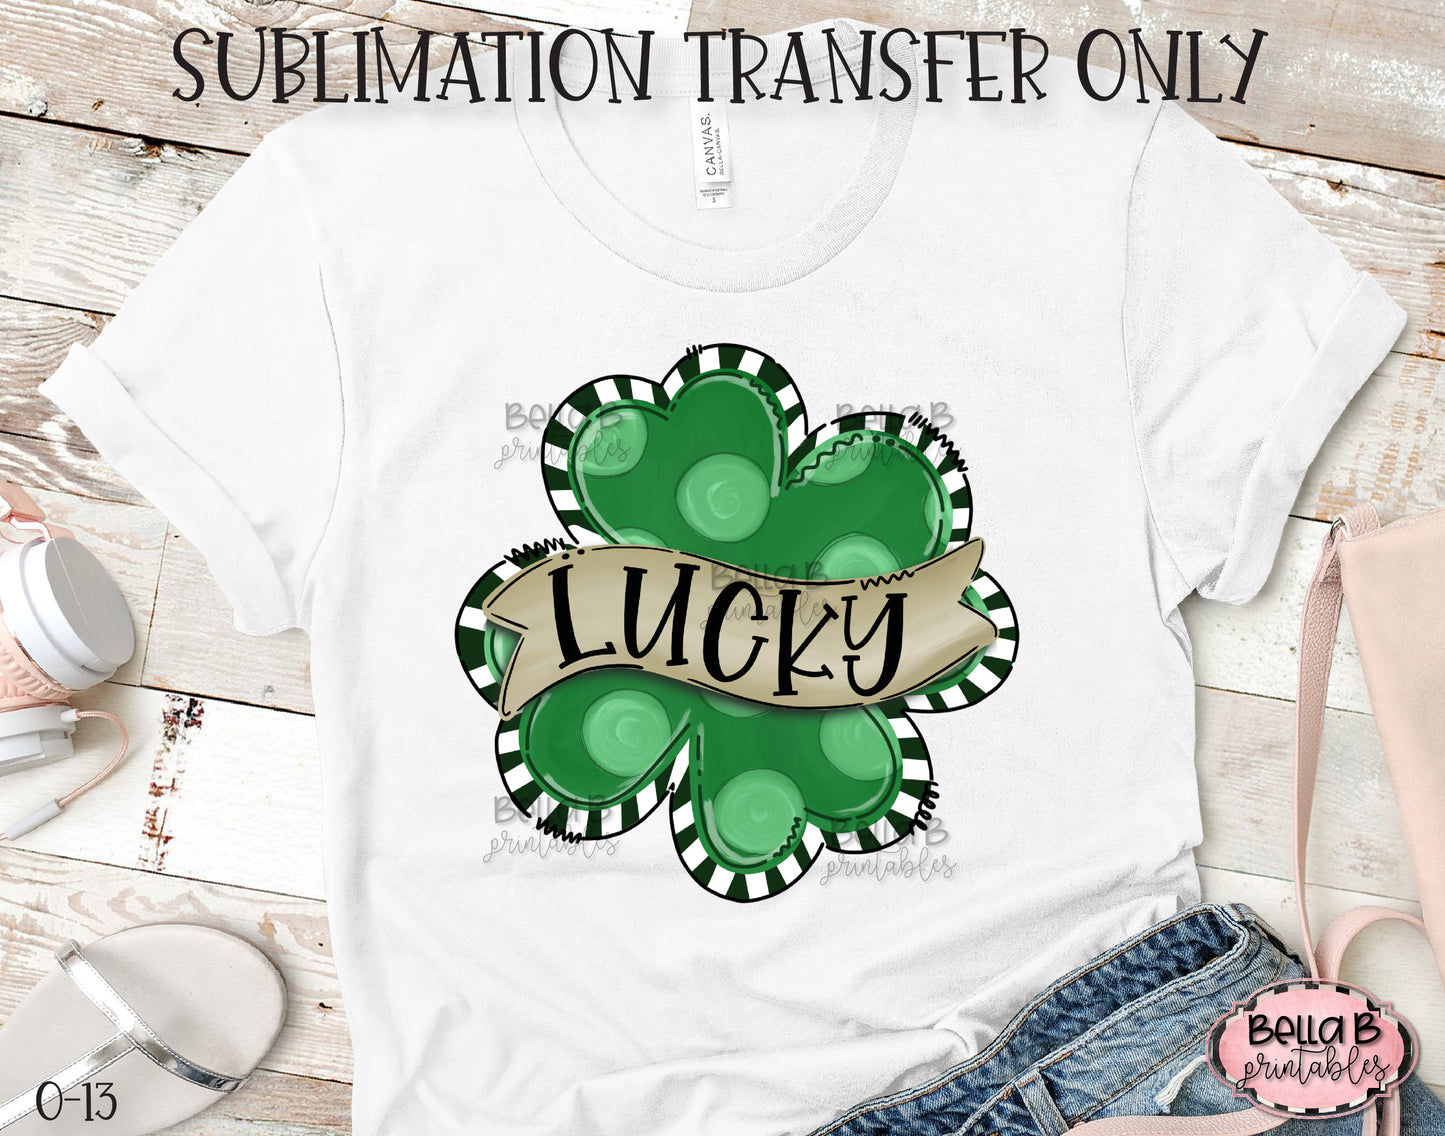 Hand Drawn Lucky Clover Sublimation Transfer, Ready To Press, Heat Press Transfer, Sublimation Print